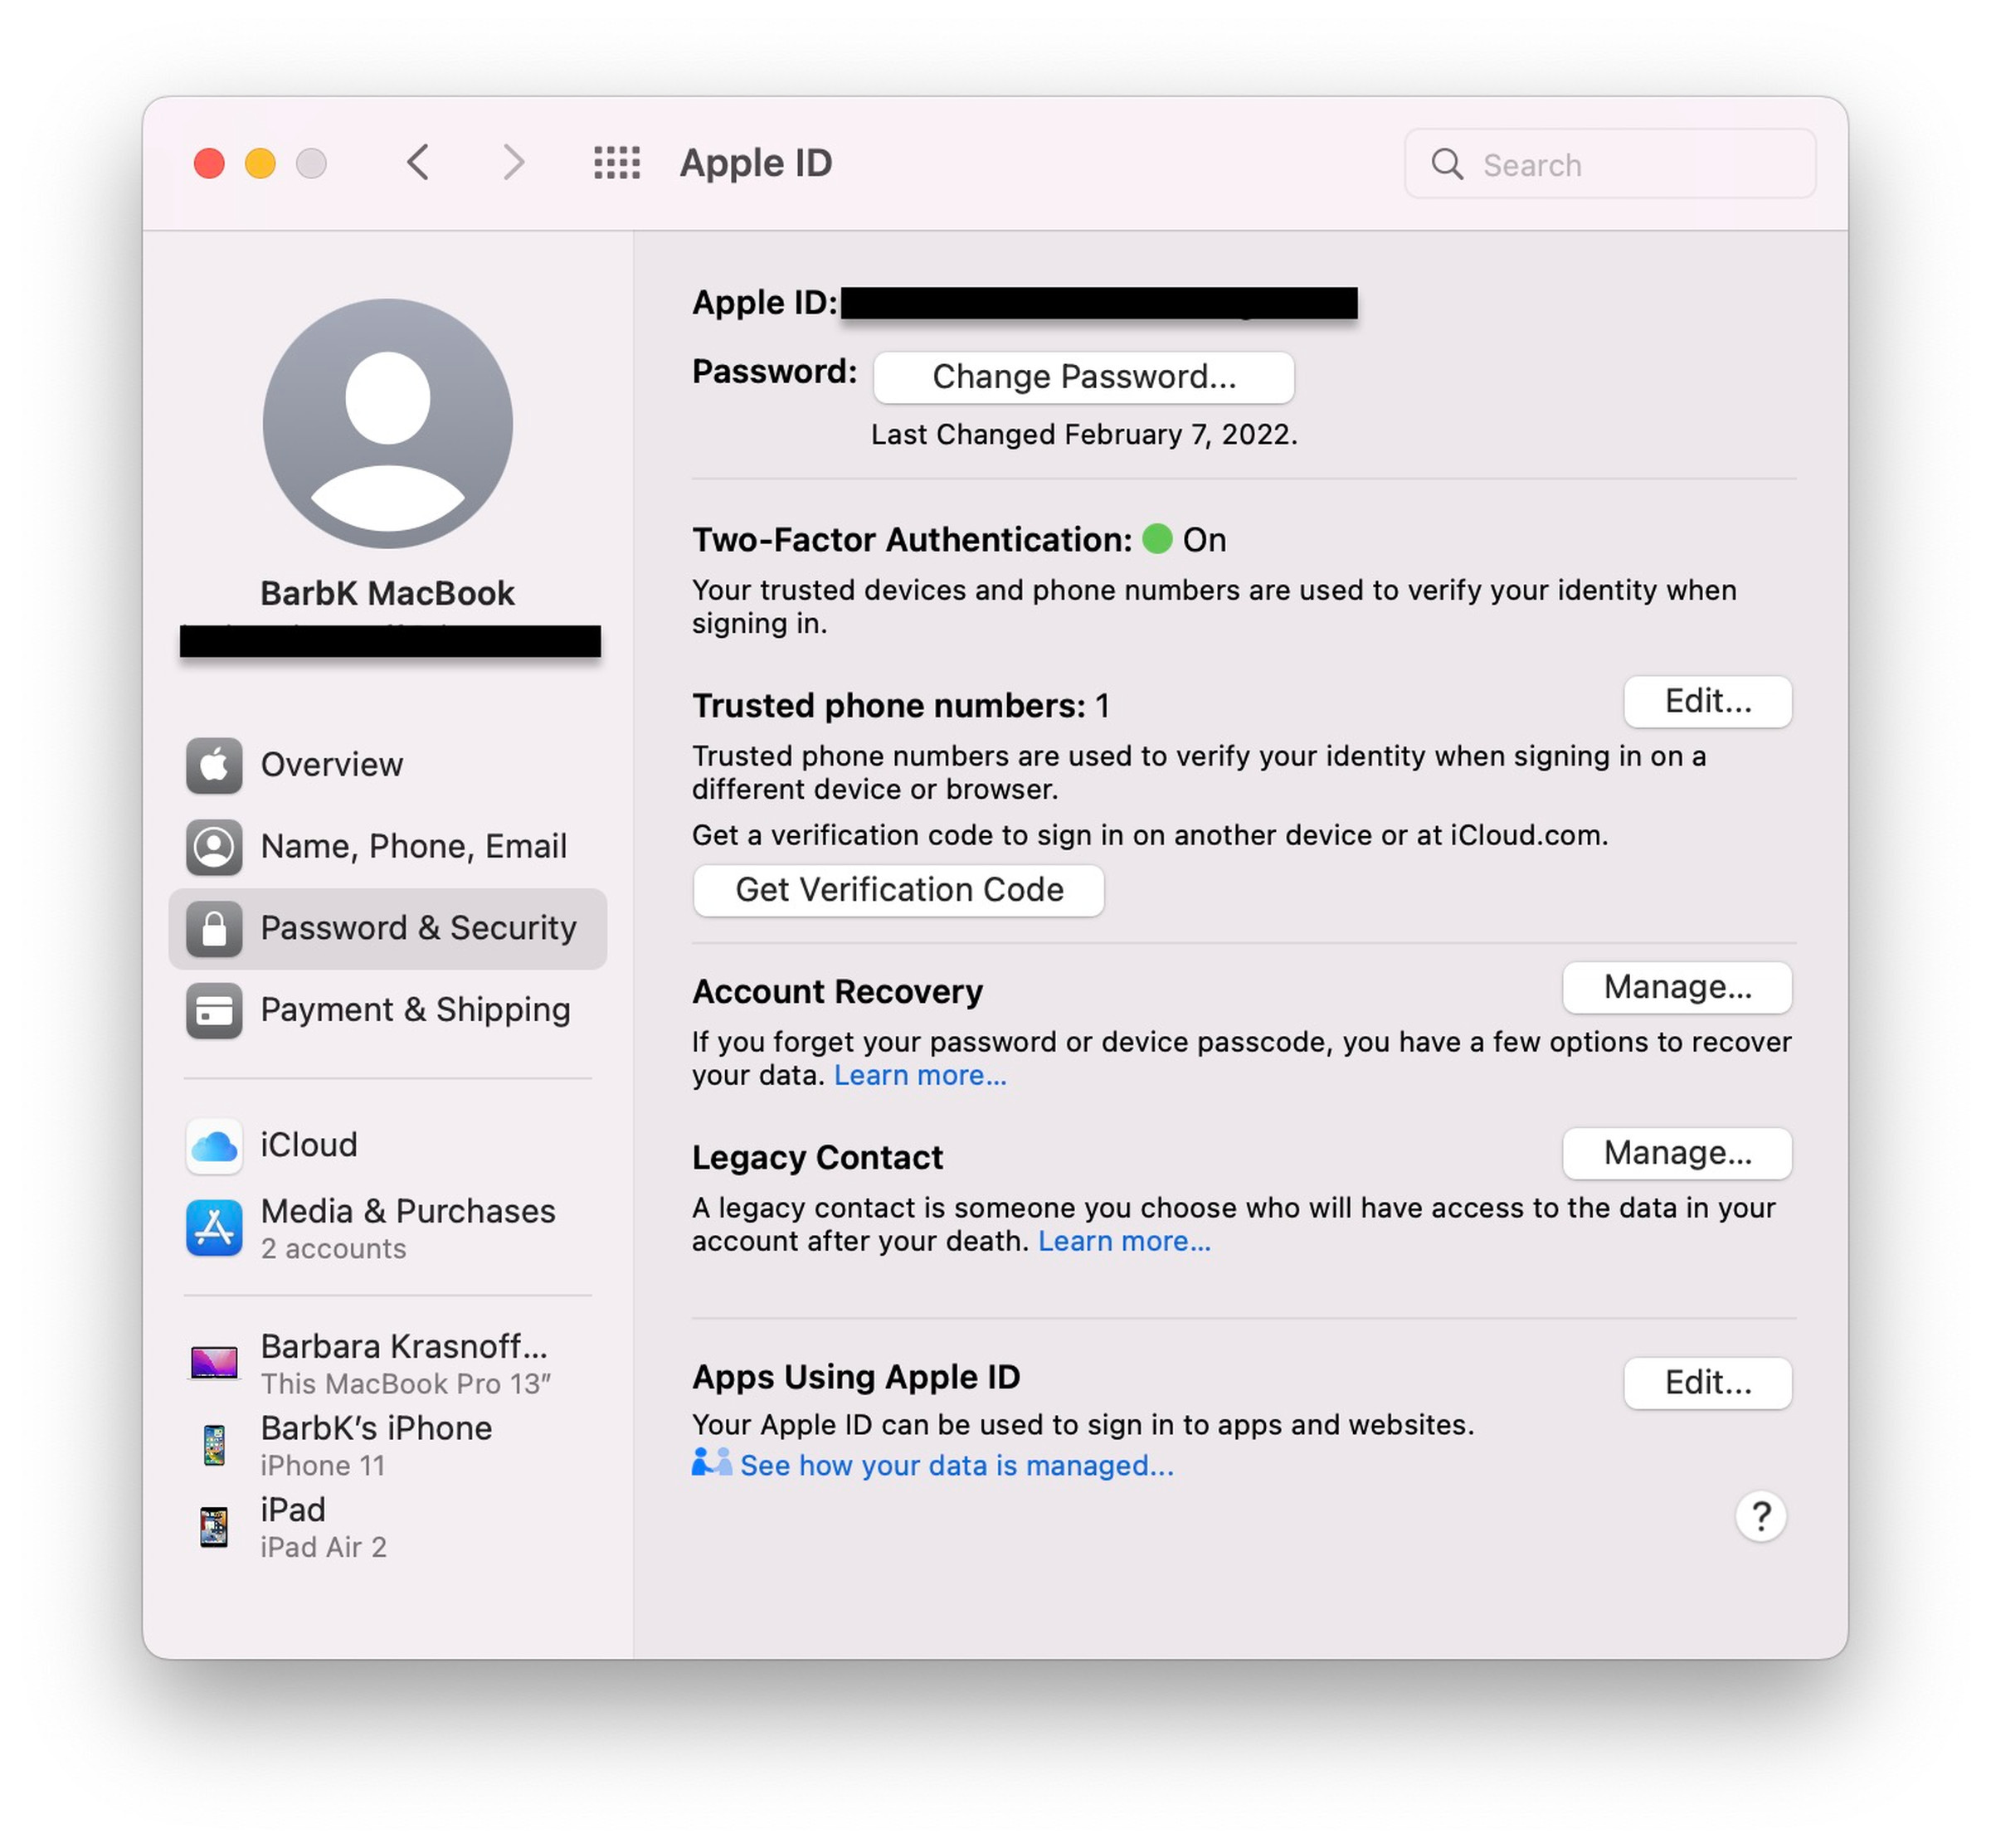 tech news Apple ID security page with options to change passwords, select trusted phone numbers, and others.